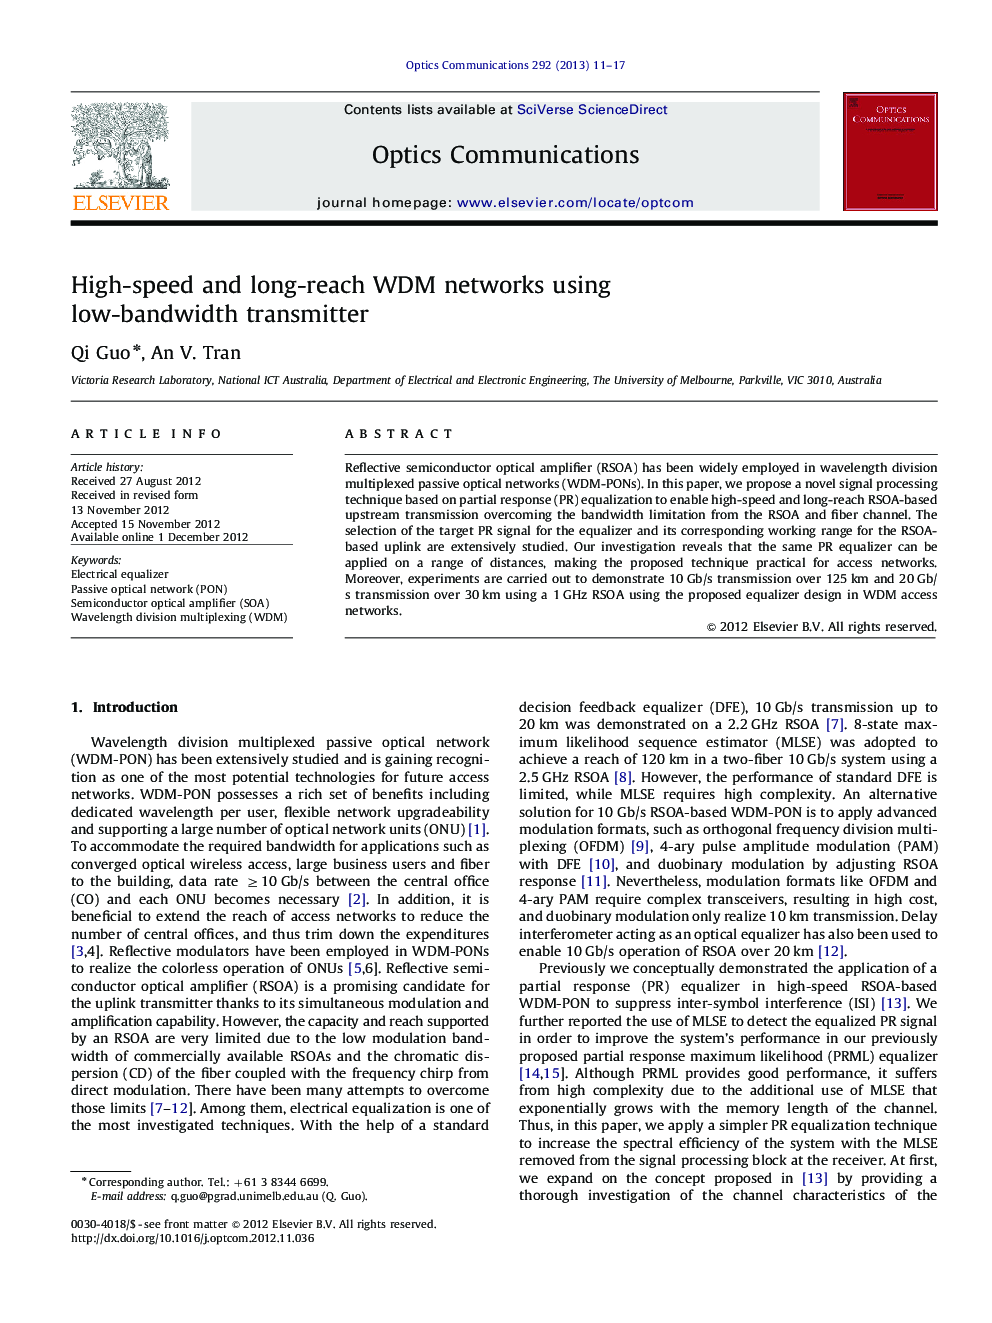 High-speed and long-reach WDM networks using low-bandwidth transmitter